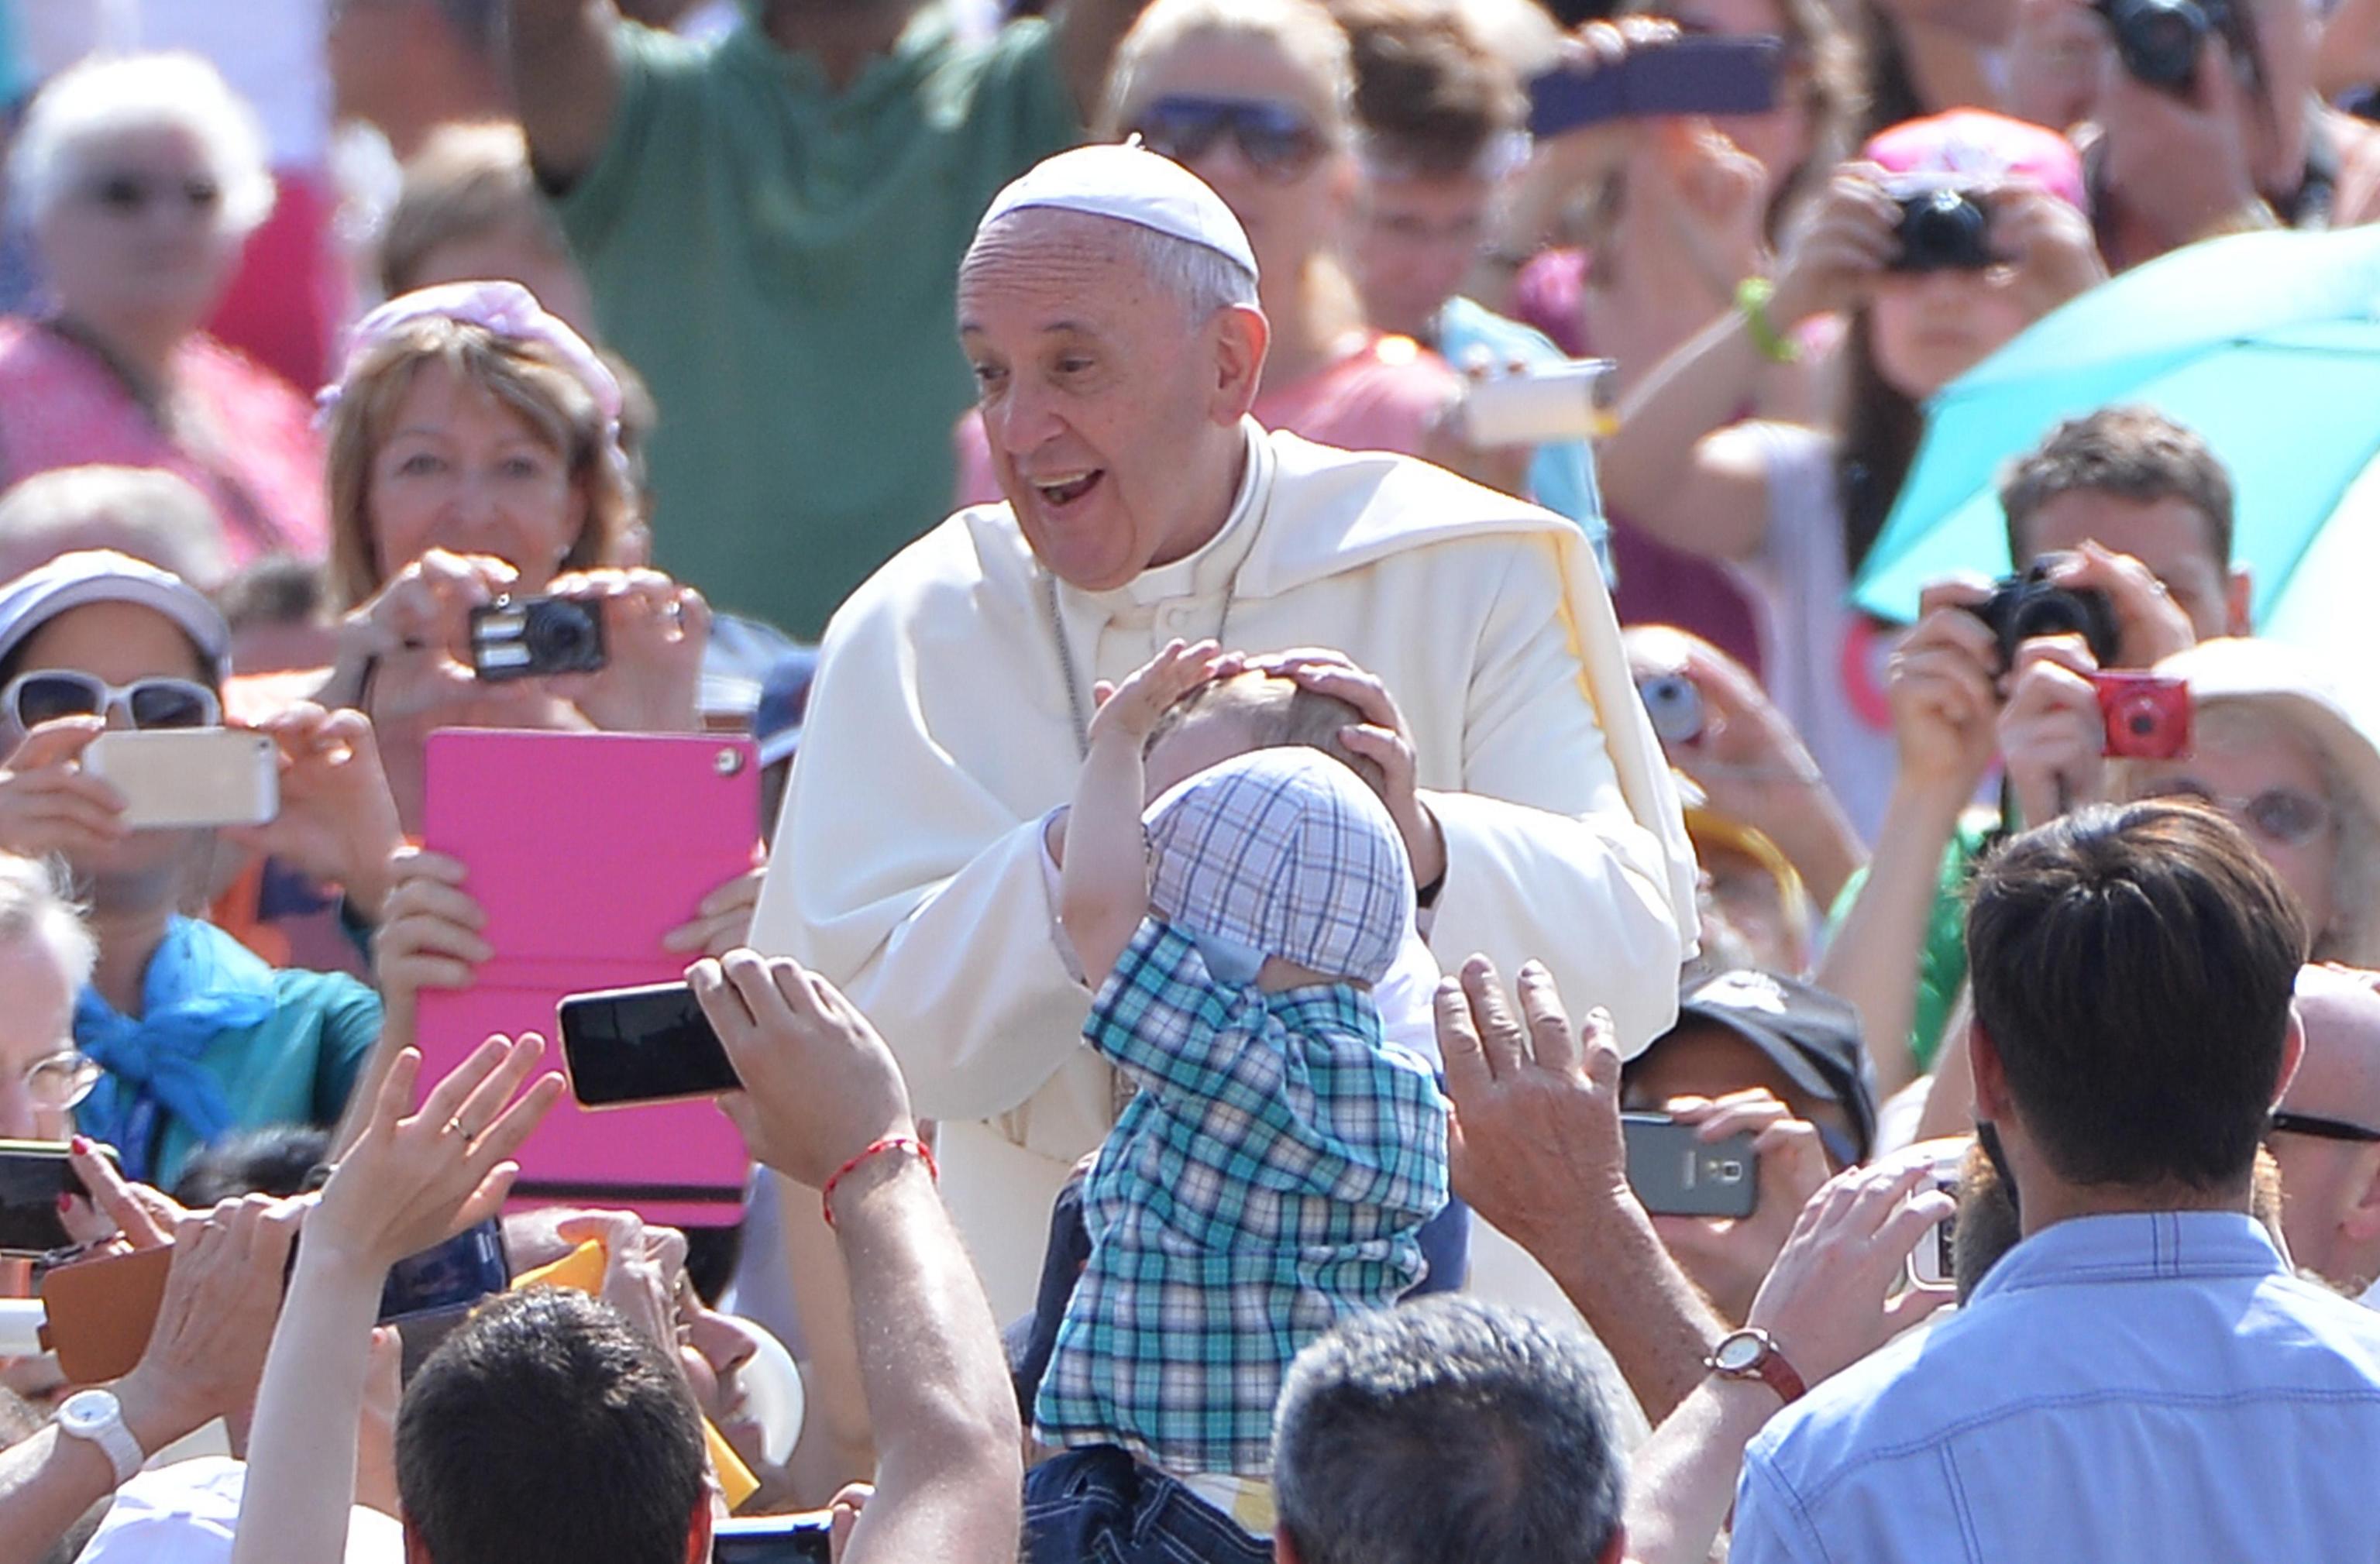 Pope Francis greets the faithful at his weekly general audience in St. Peter's Square